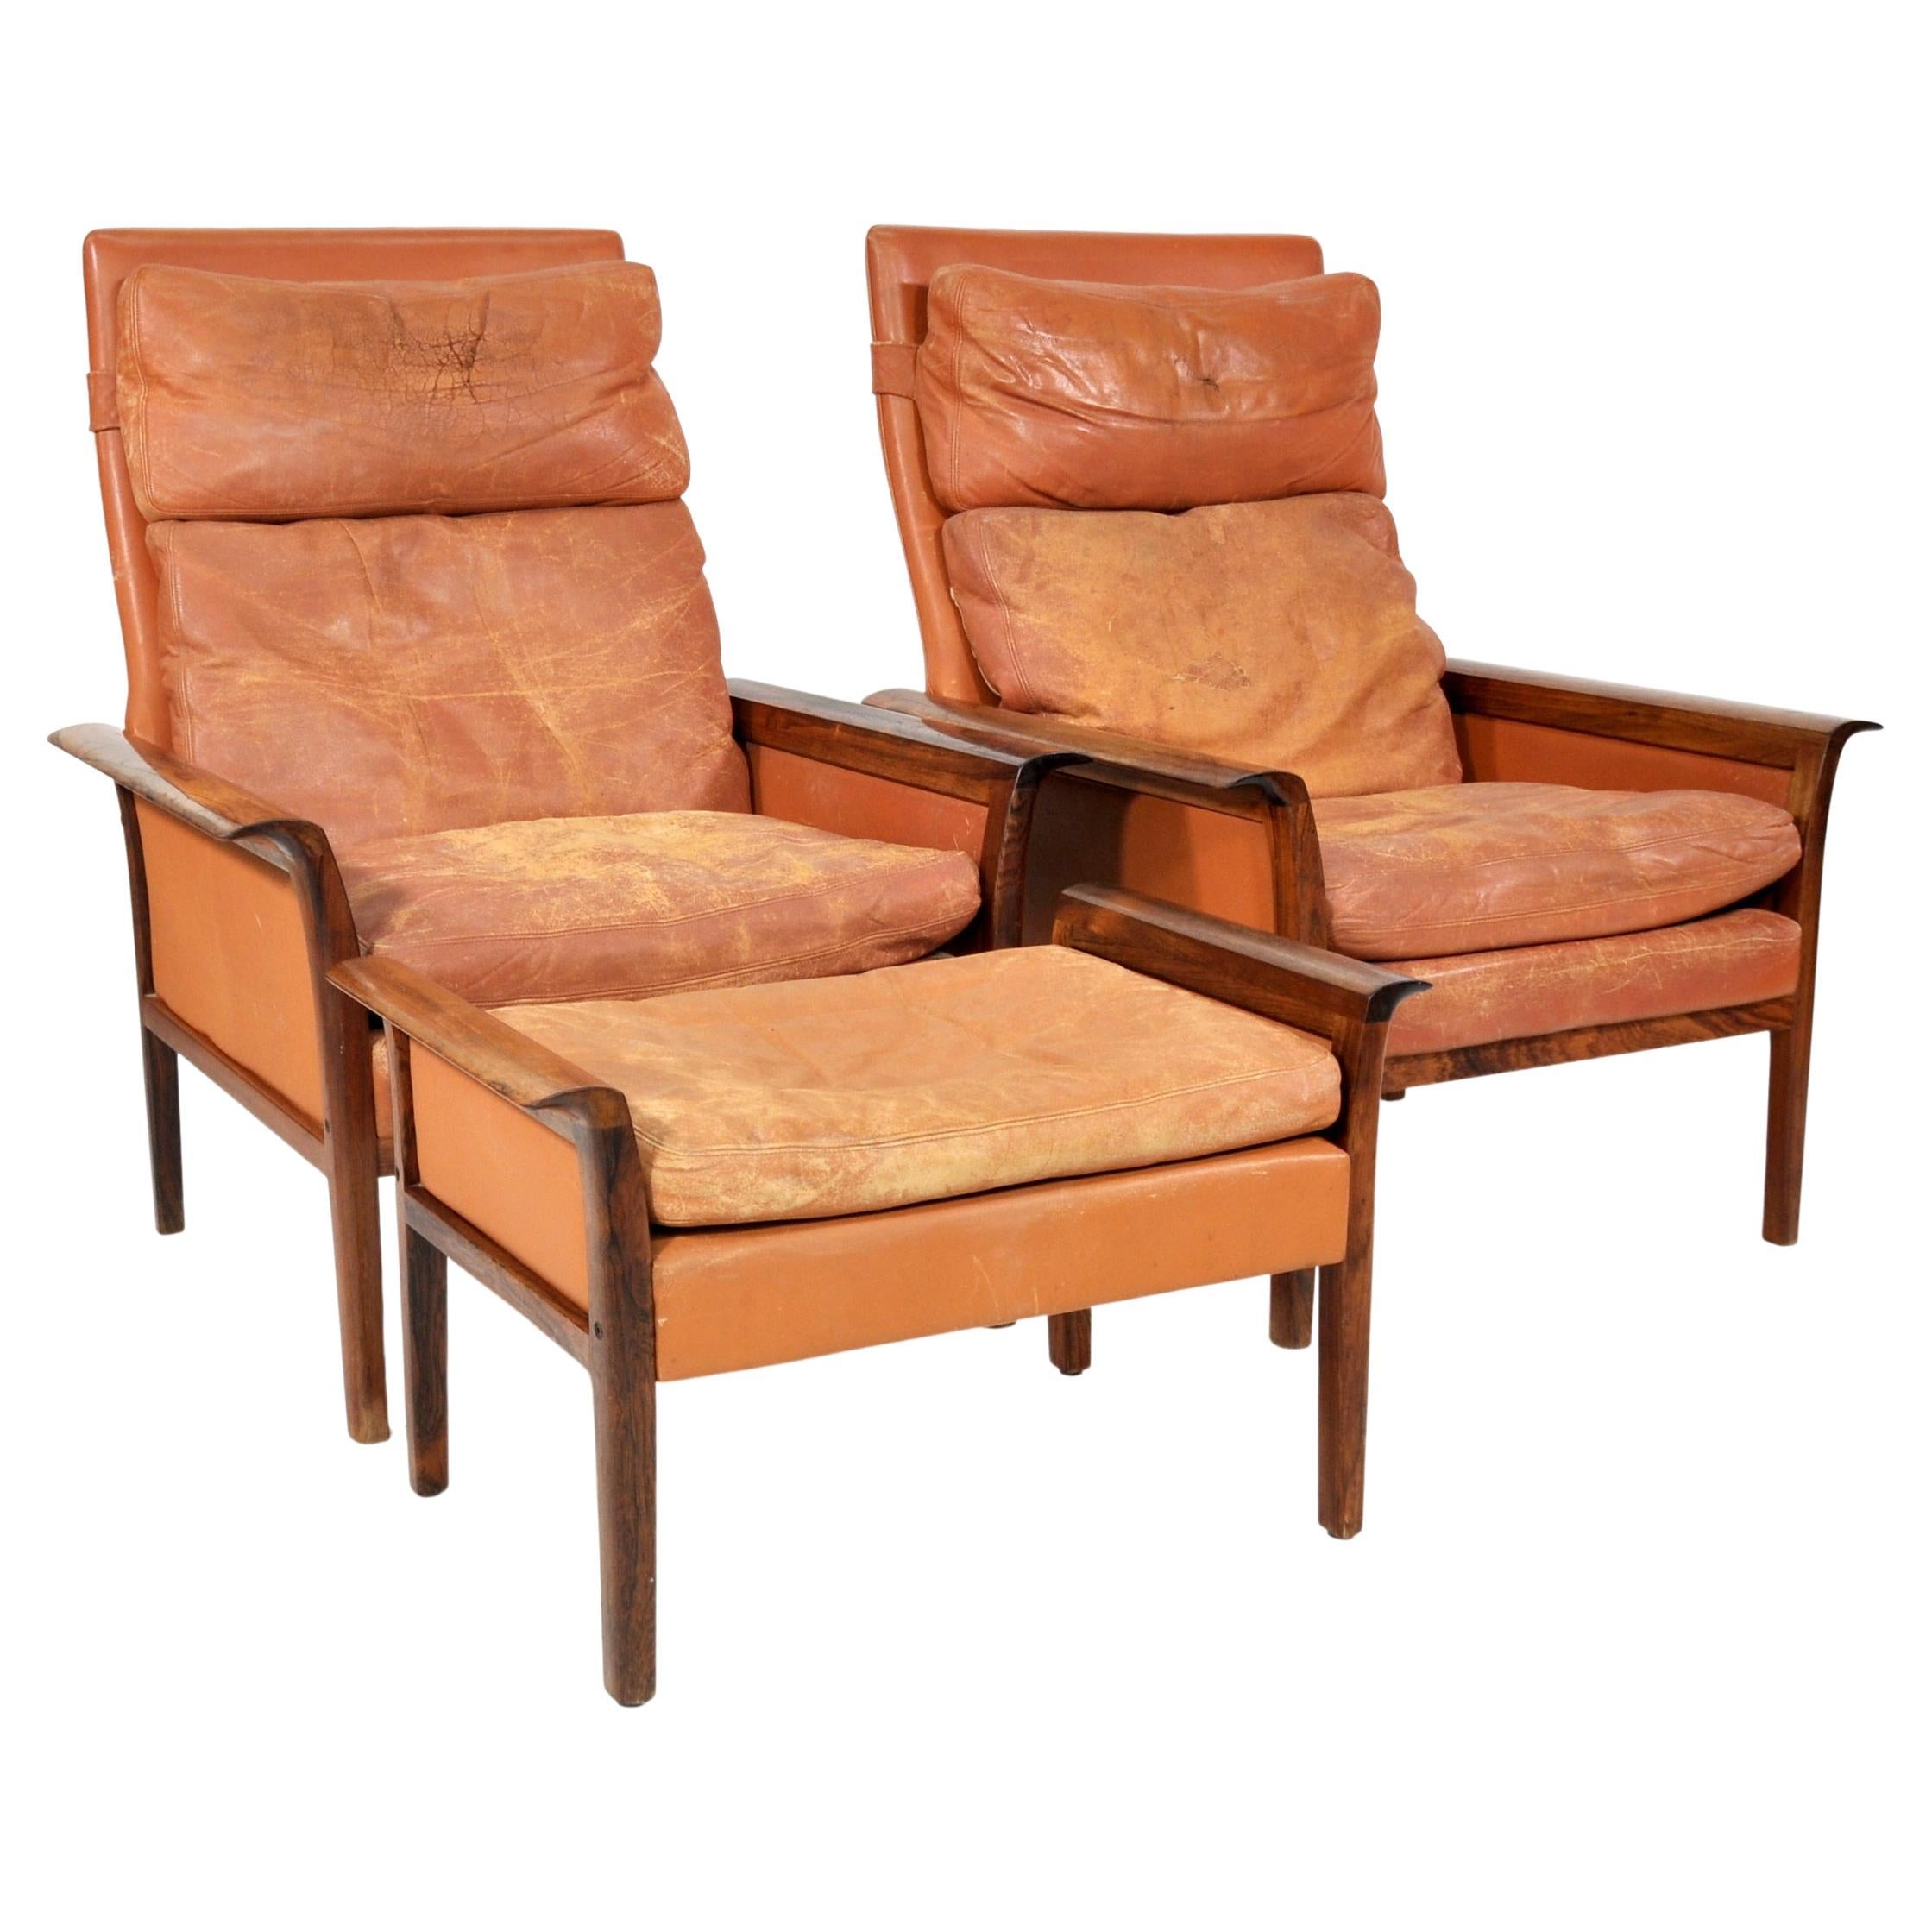 Pair Rosewood and Leather Chairs with Ottoman by Fredrik Kayser for Vatne Mobler